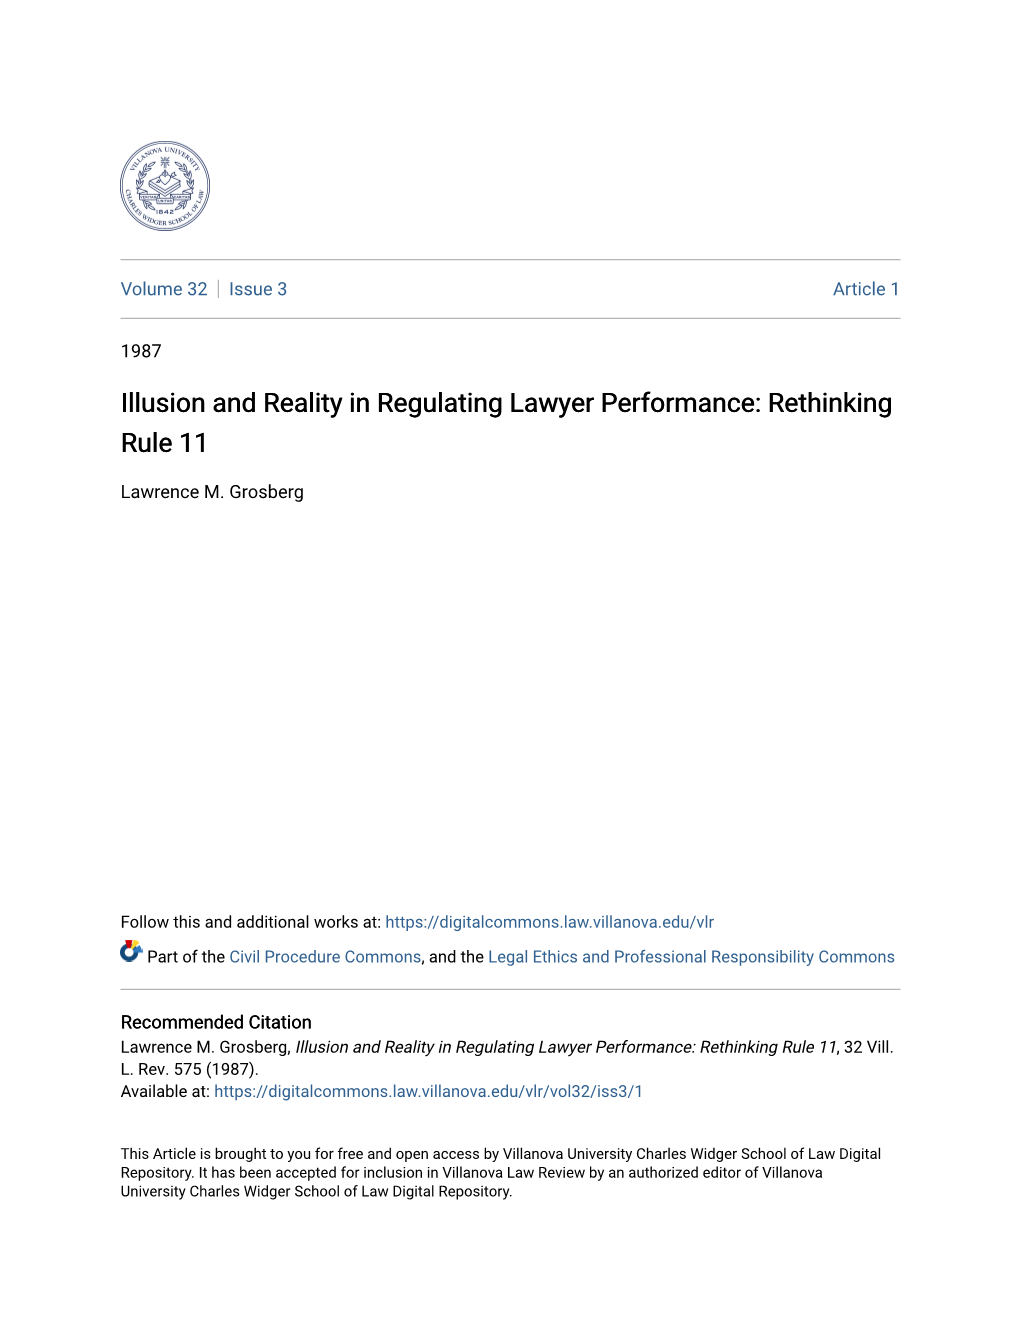 Illusion and Reality in Regulating Lawyer Performance: Rethinking Rule 11